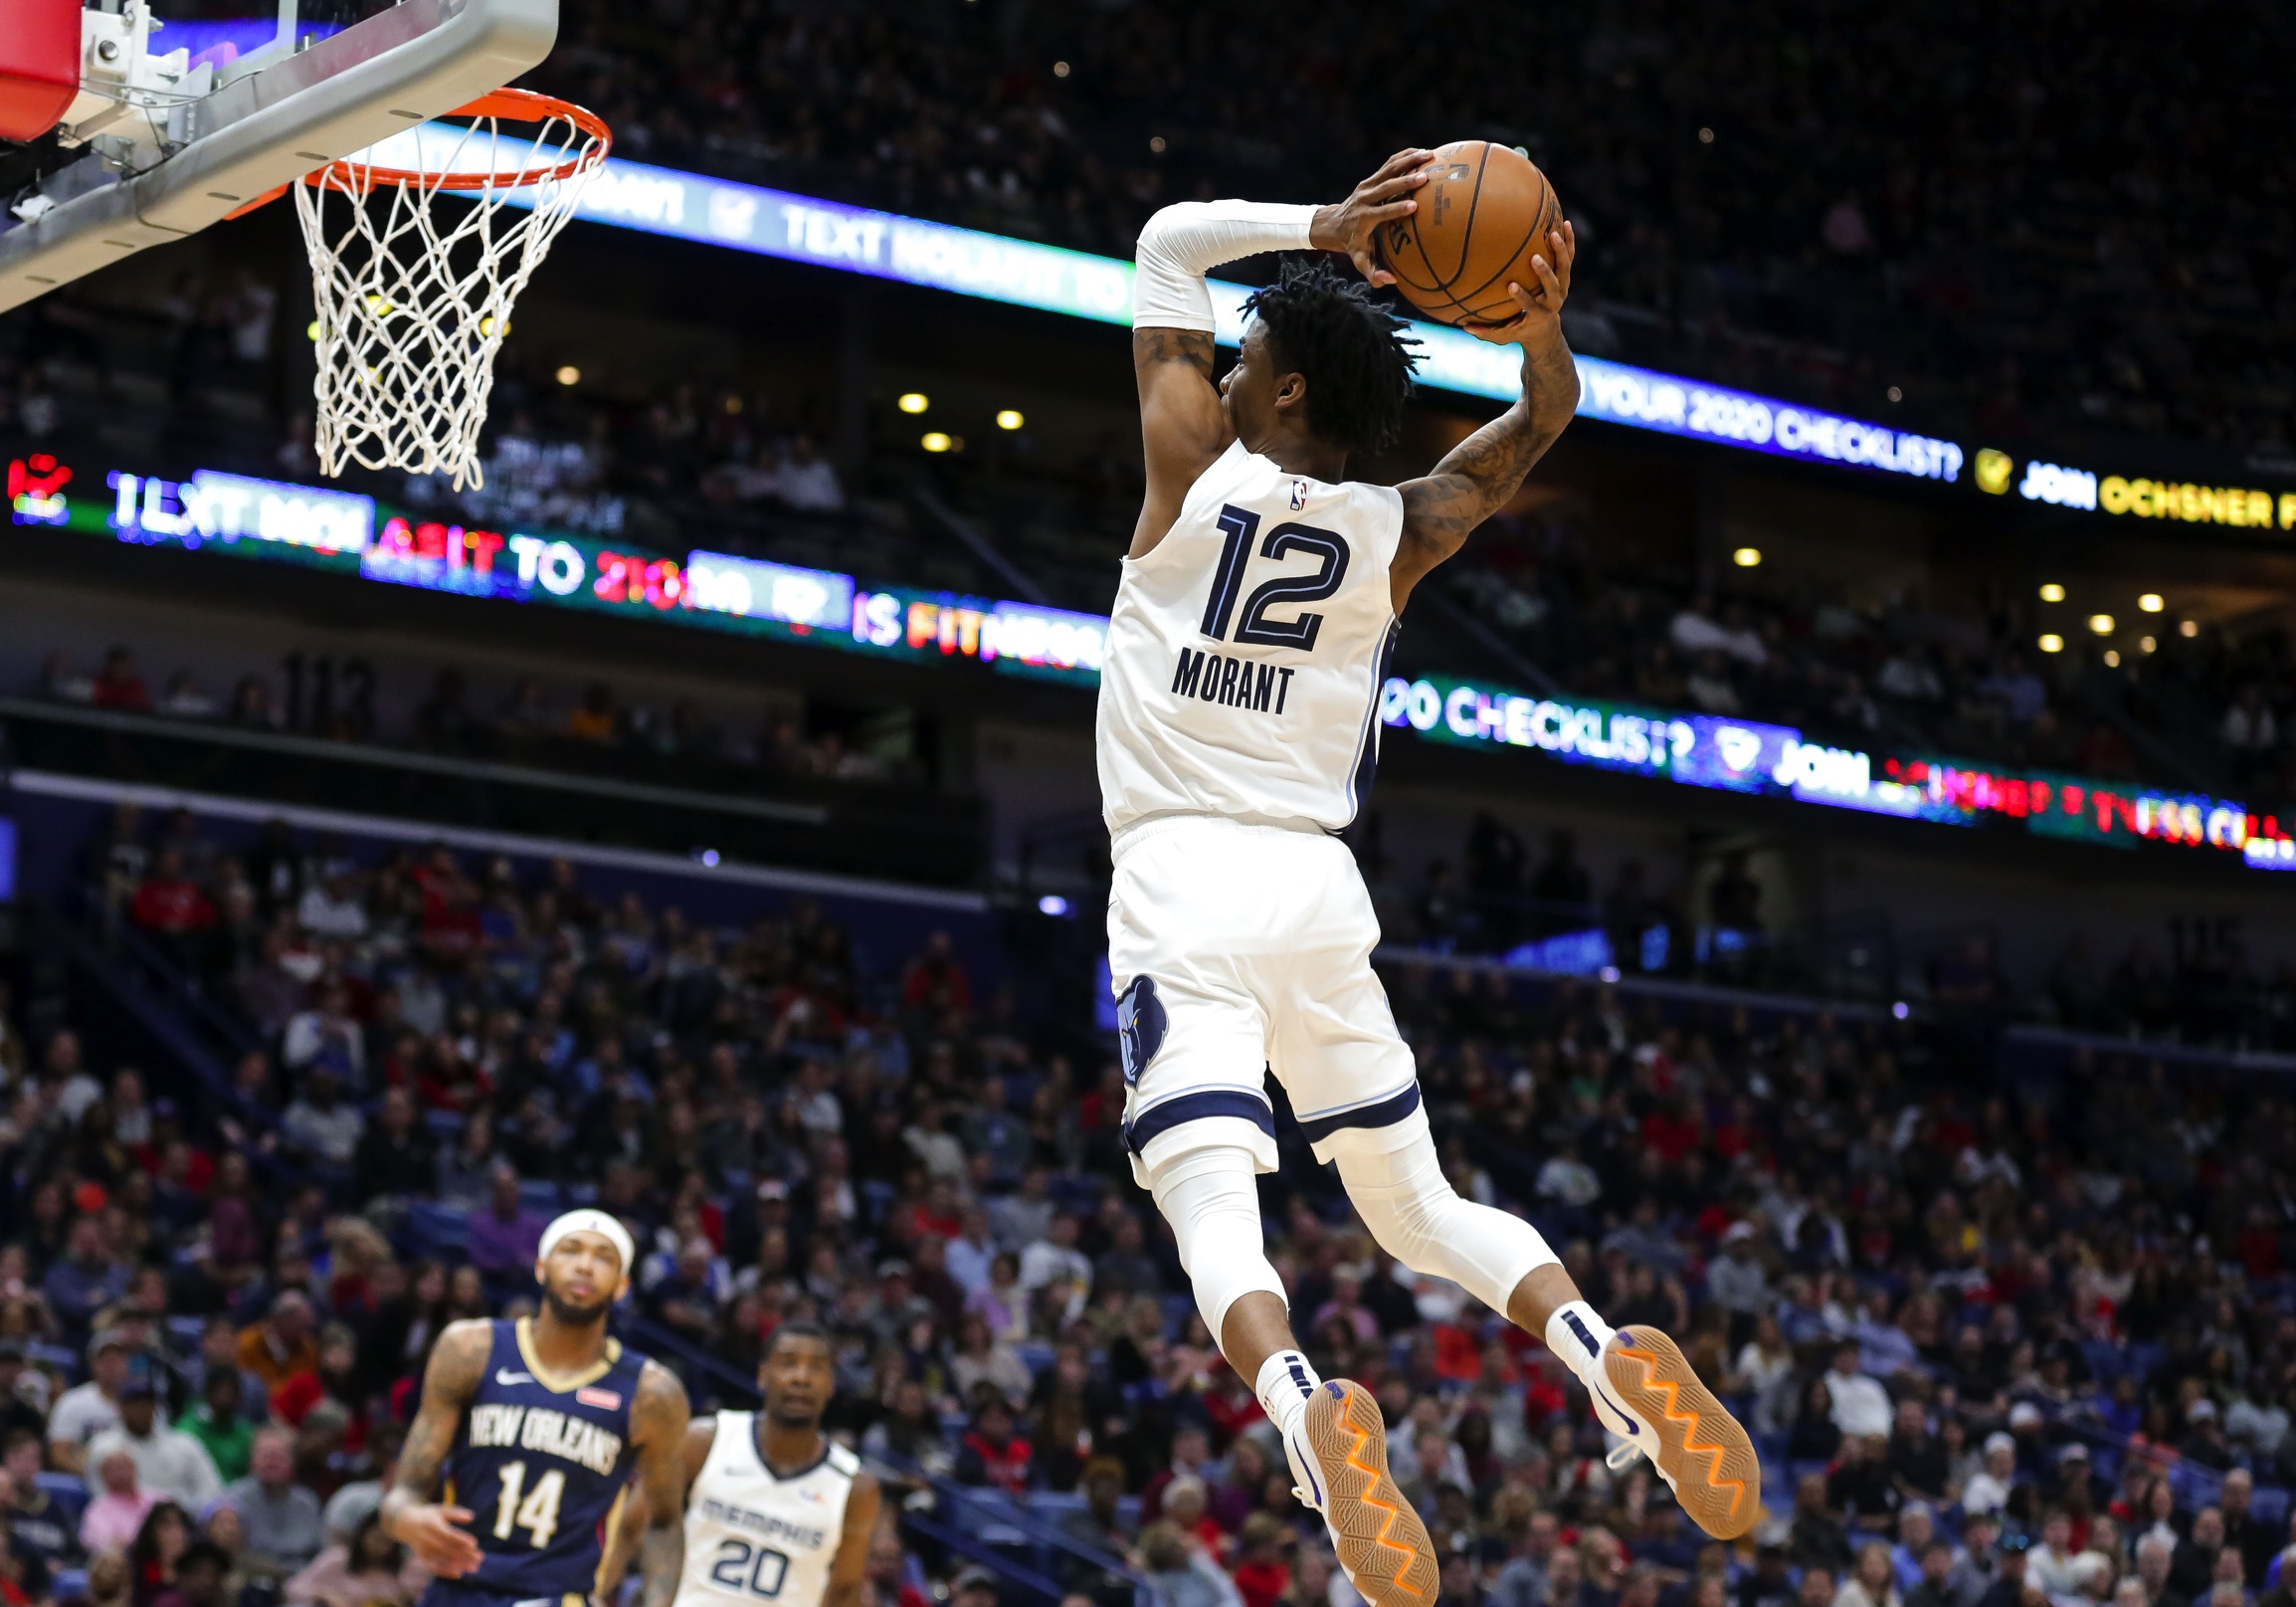 WATCH: Ja Morant soars on jaw-dropping alley-oop dunk against Trail Blazers